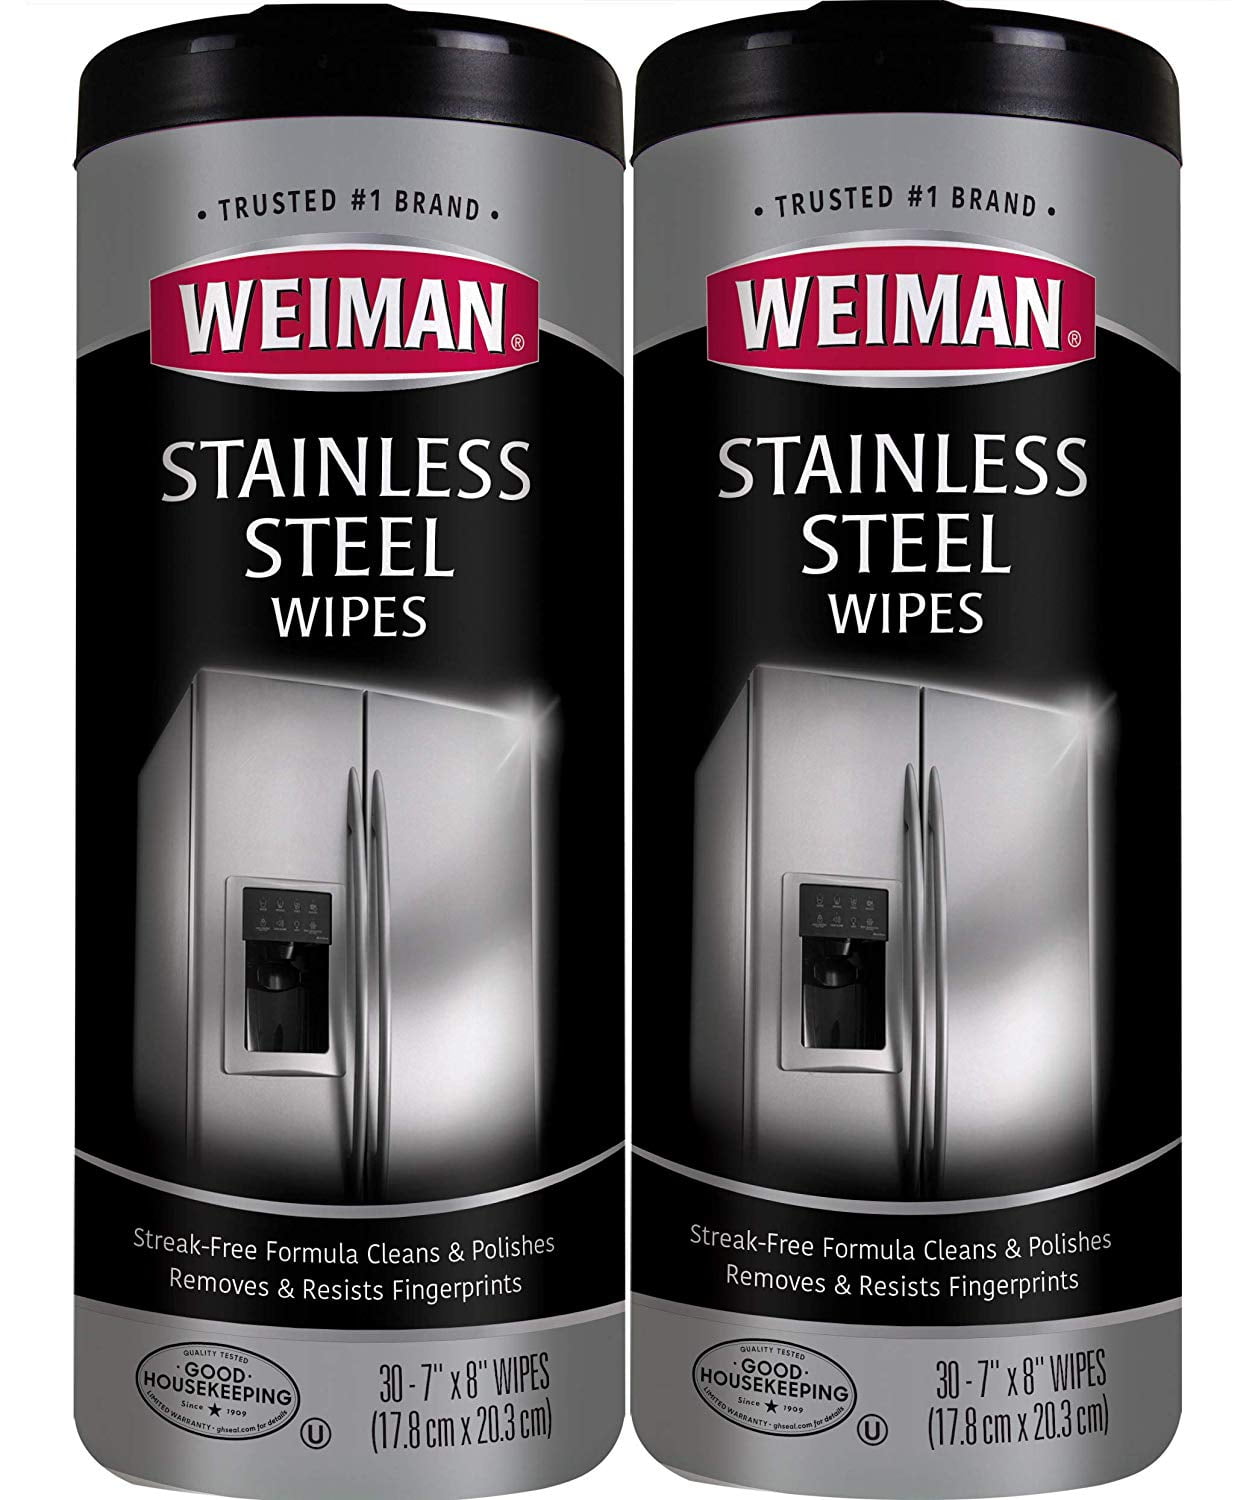 weiman stainless steel cleaner target